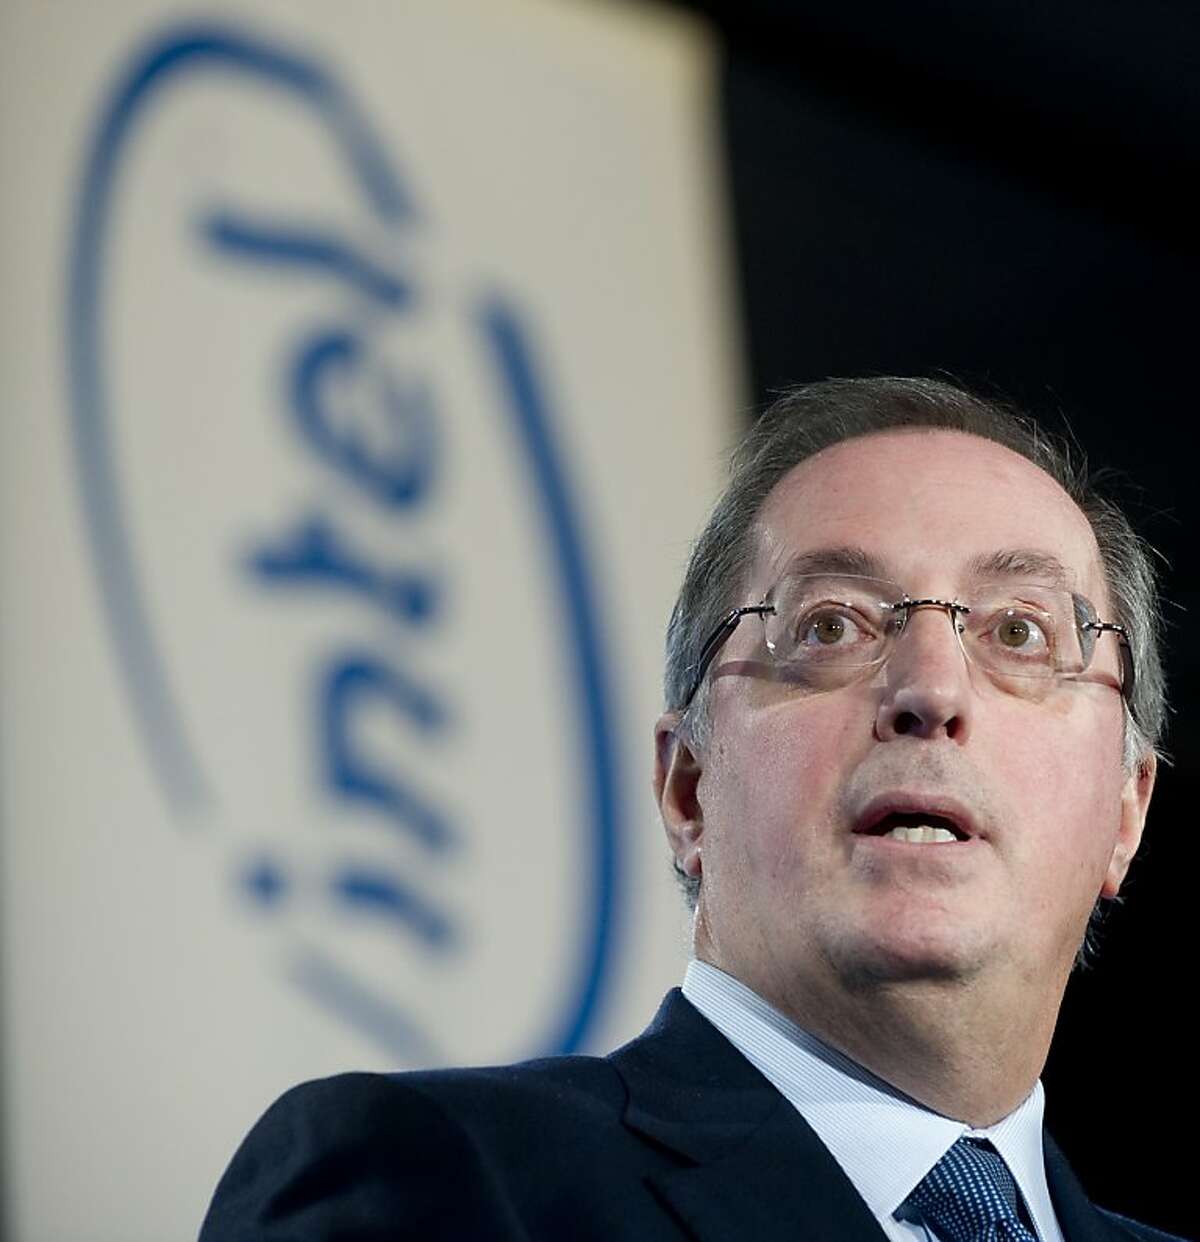 (FILES)Intel CEO Paul Otellini introduces US President Barack Obama before he speaks about advancing education for US students to compete on the international stage after touring a manufacturing facility at Intel in Hillsboro, Oregon, in this February 18, 2011 file photo. Intel Corp. announced November 19, 2012 that Otellini would retire in May, and that a search for a new CEO was underway. AFP PHOTO / Saul LOEB / FILESSAUL LOEB/AFP/Getty Images